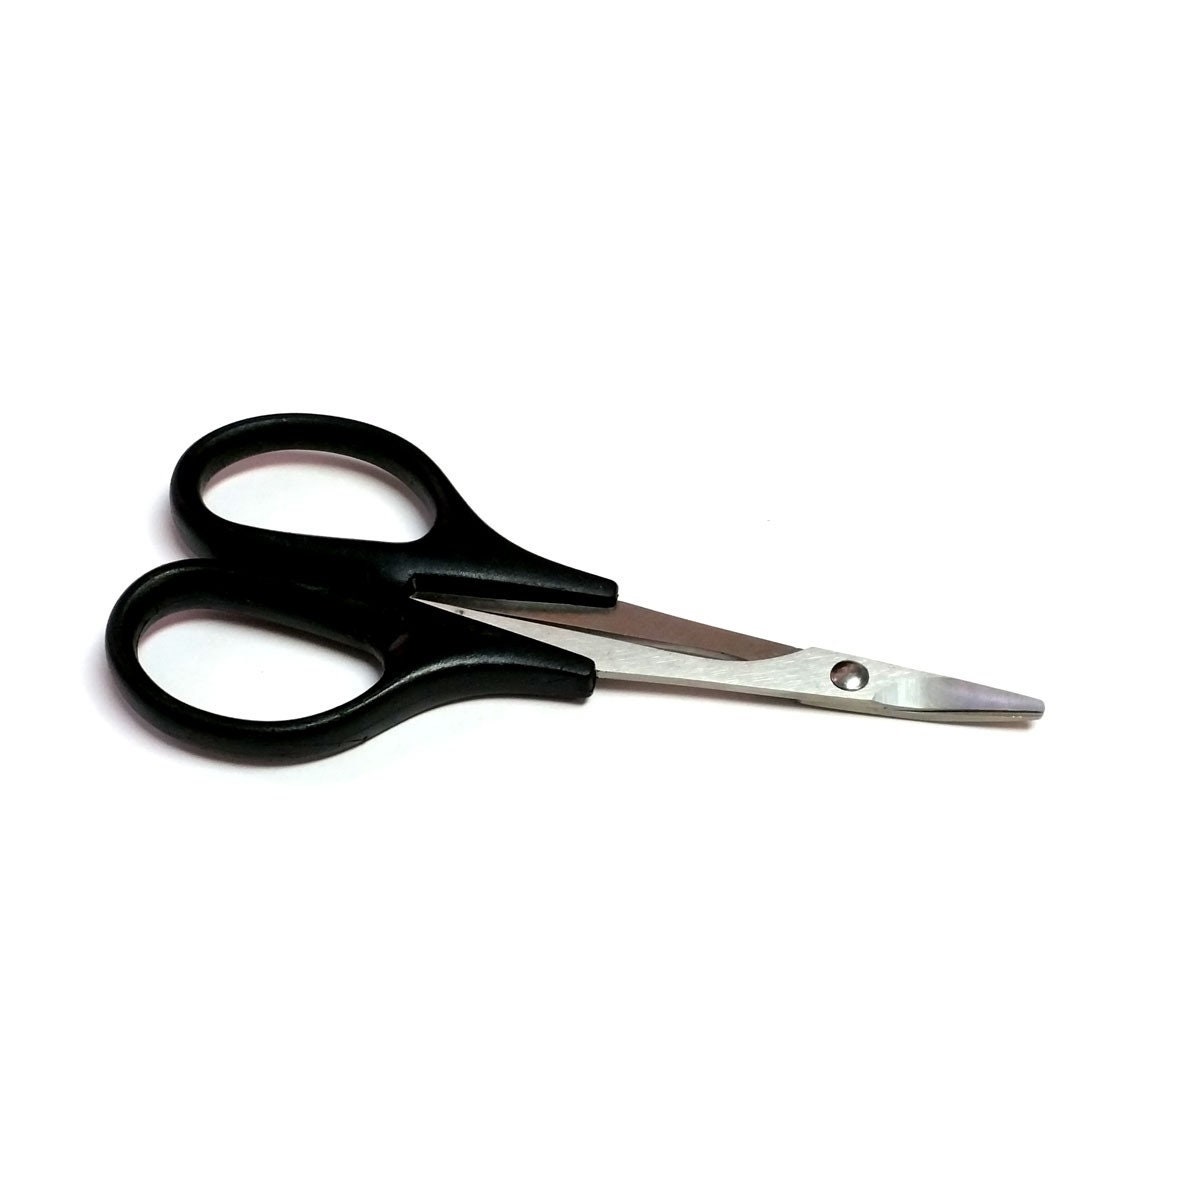 4 Squeeze-Action Micro-Scissors - Curved Blade, SHR-0002